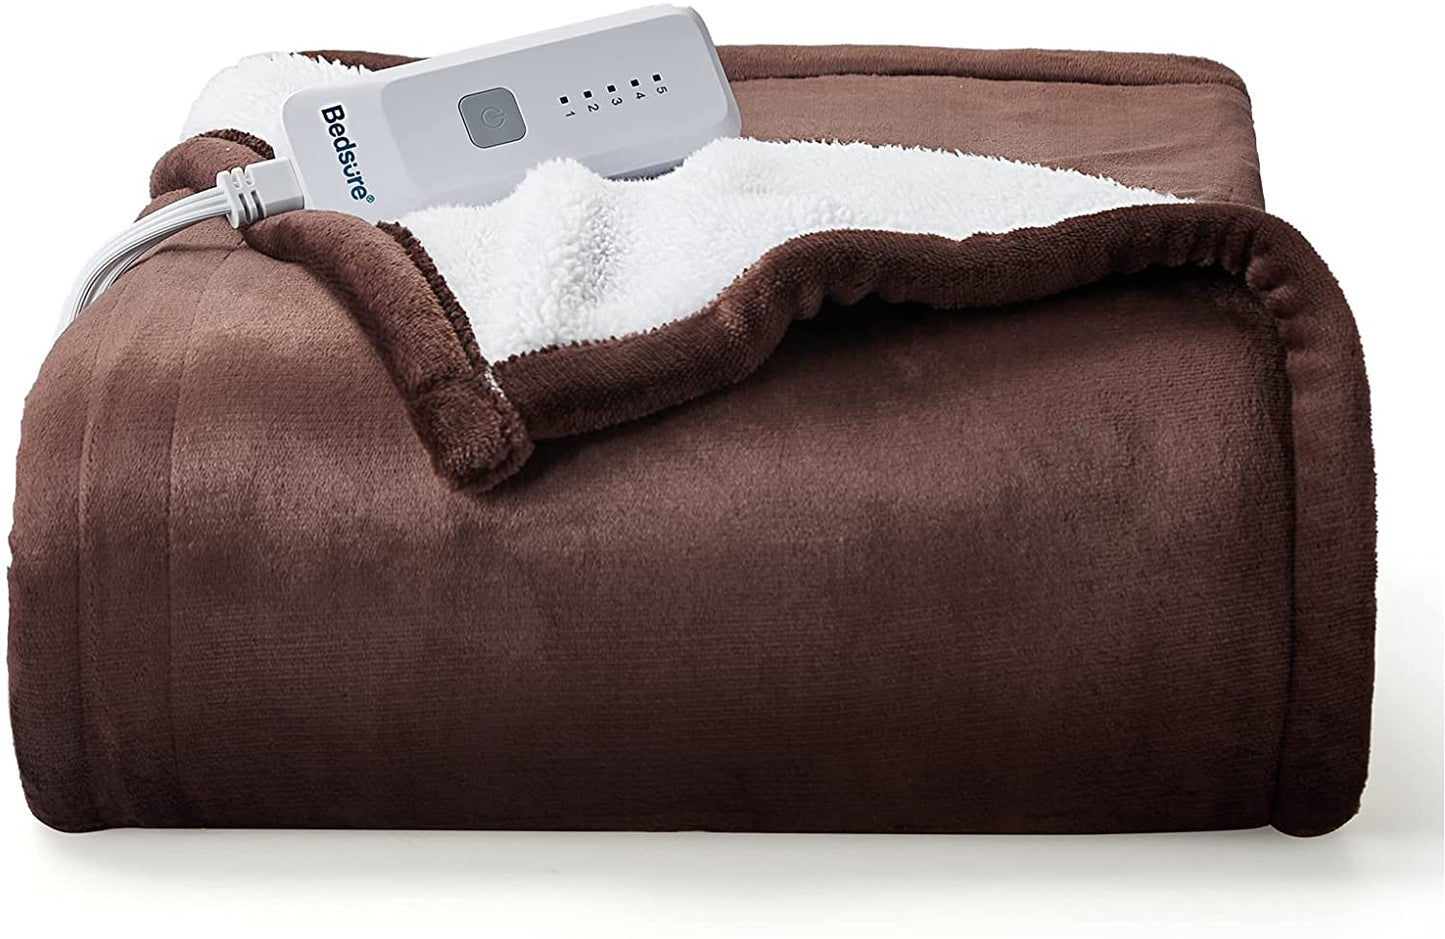 Aldricx® Soft Electric Blanket for Couch